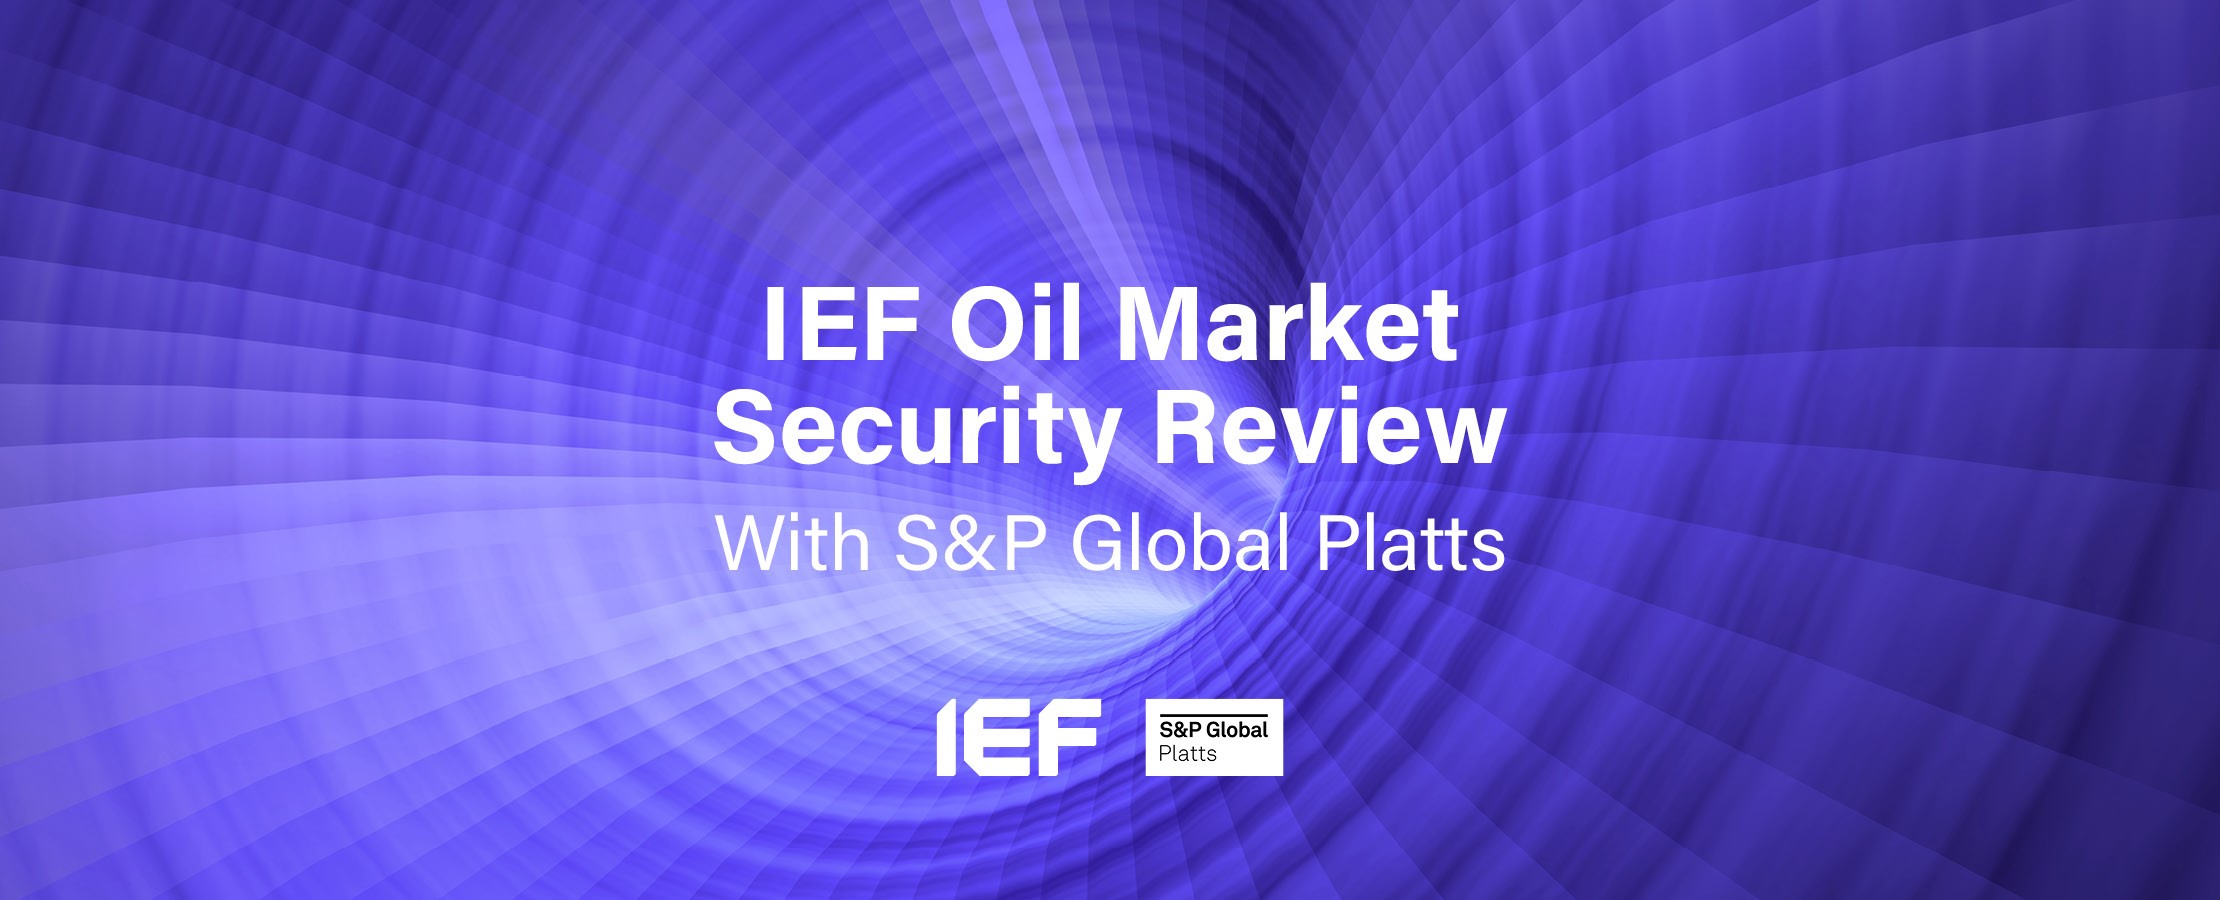 IEF Oil Market Review Banner